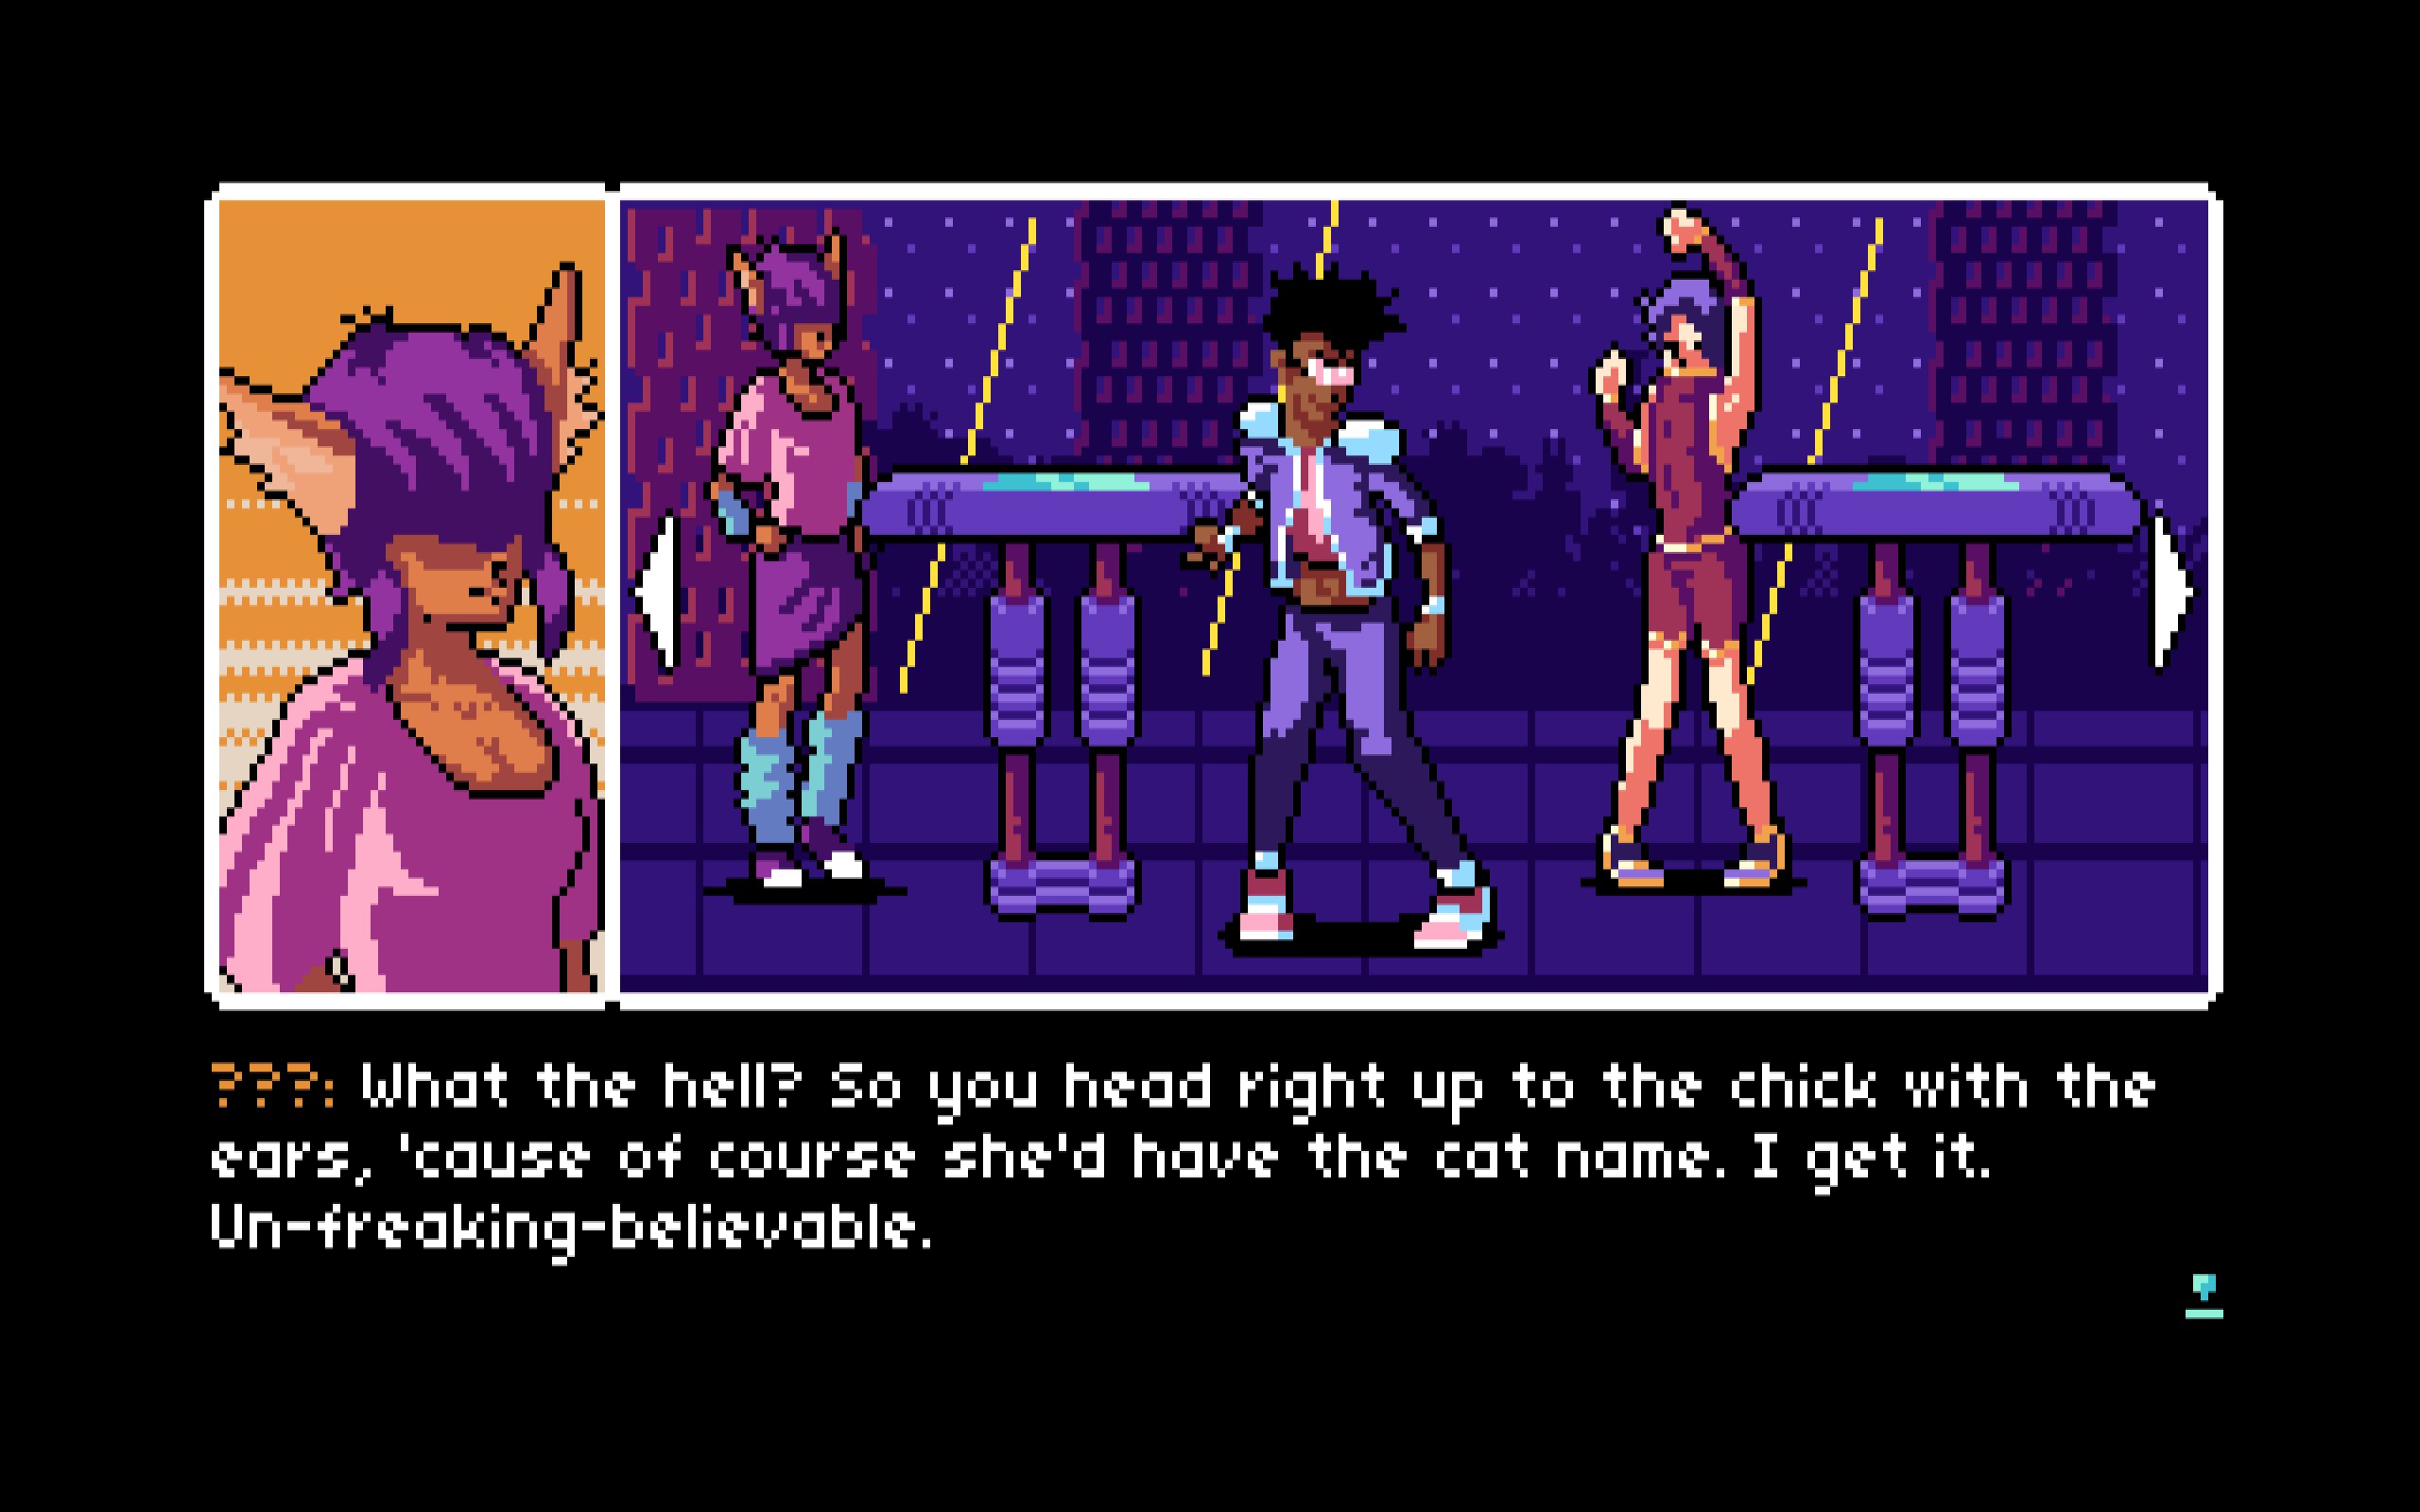 Read Only Memories #2